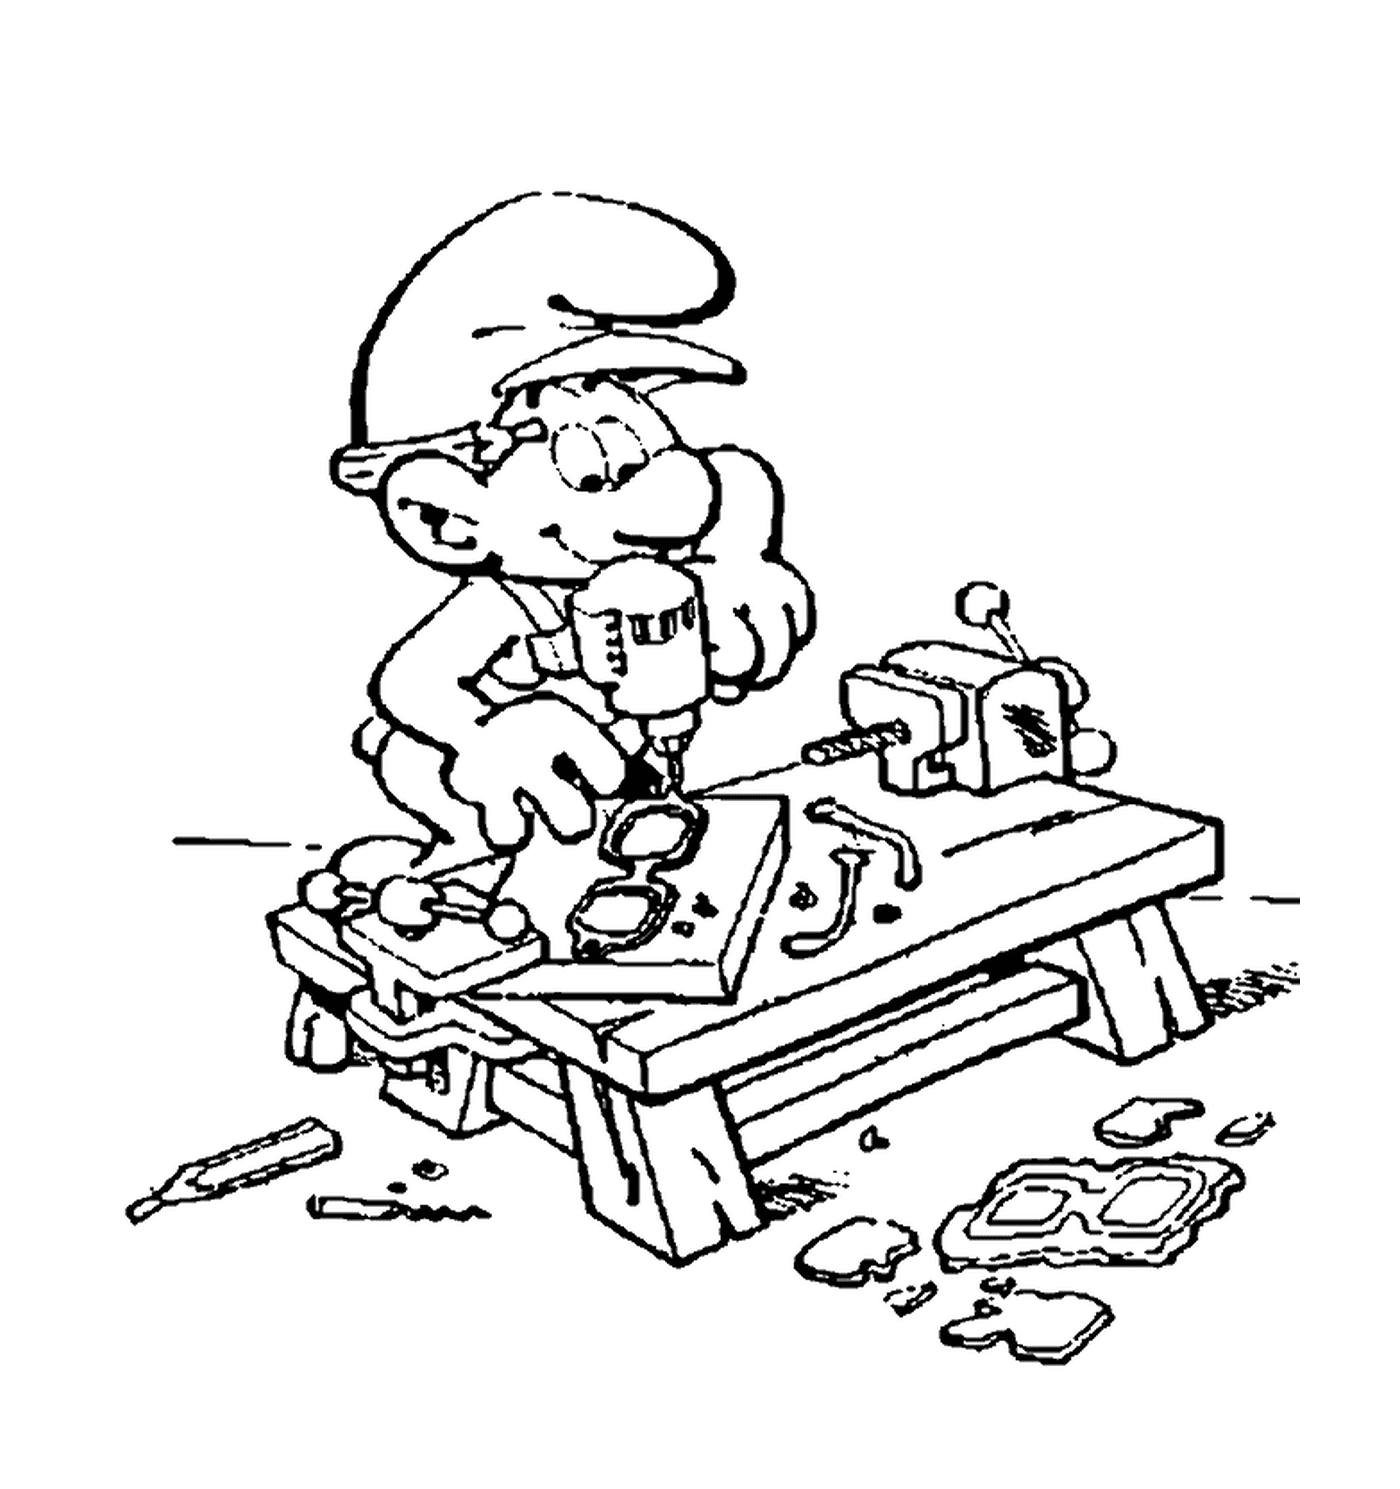  A handy gnome on a table 